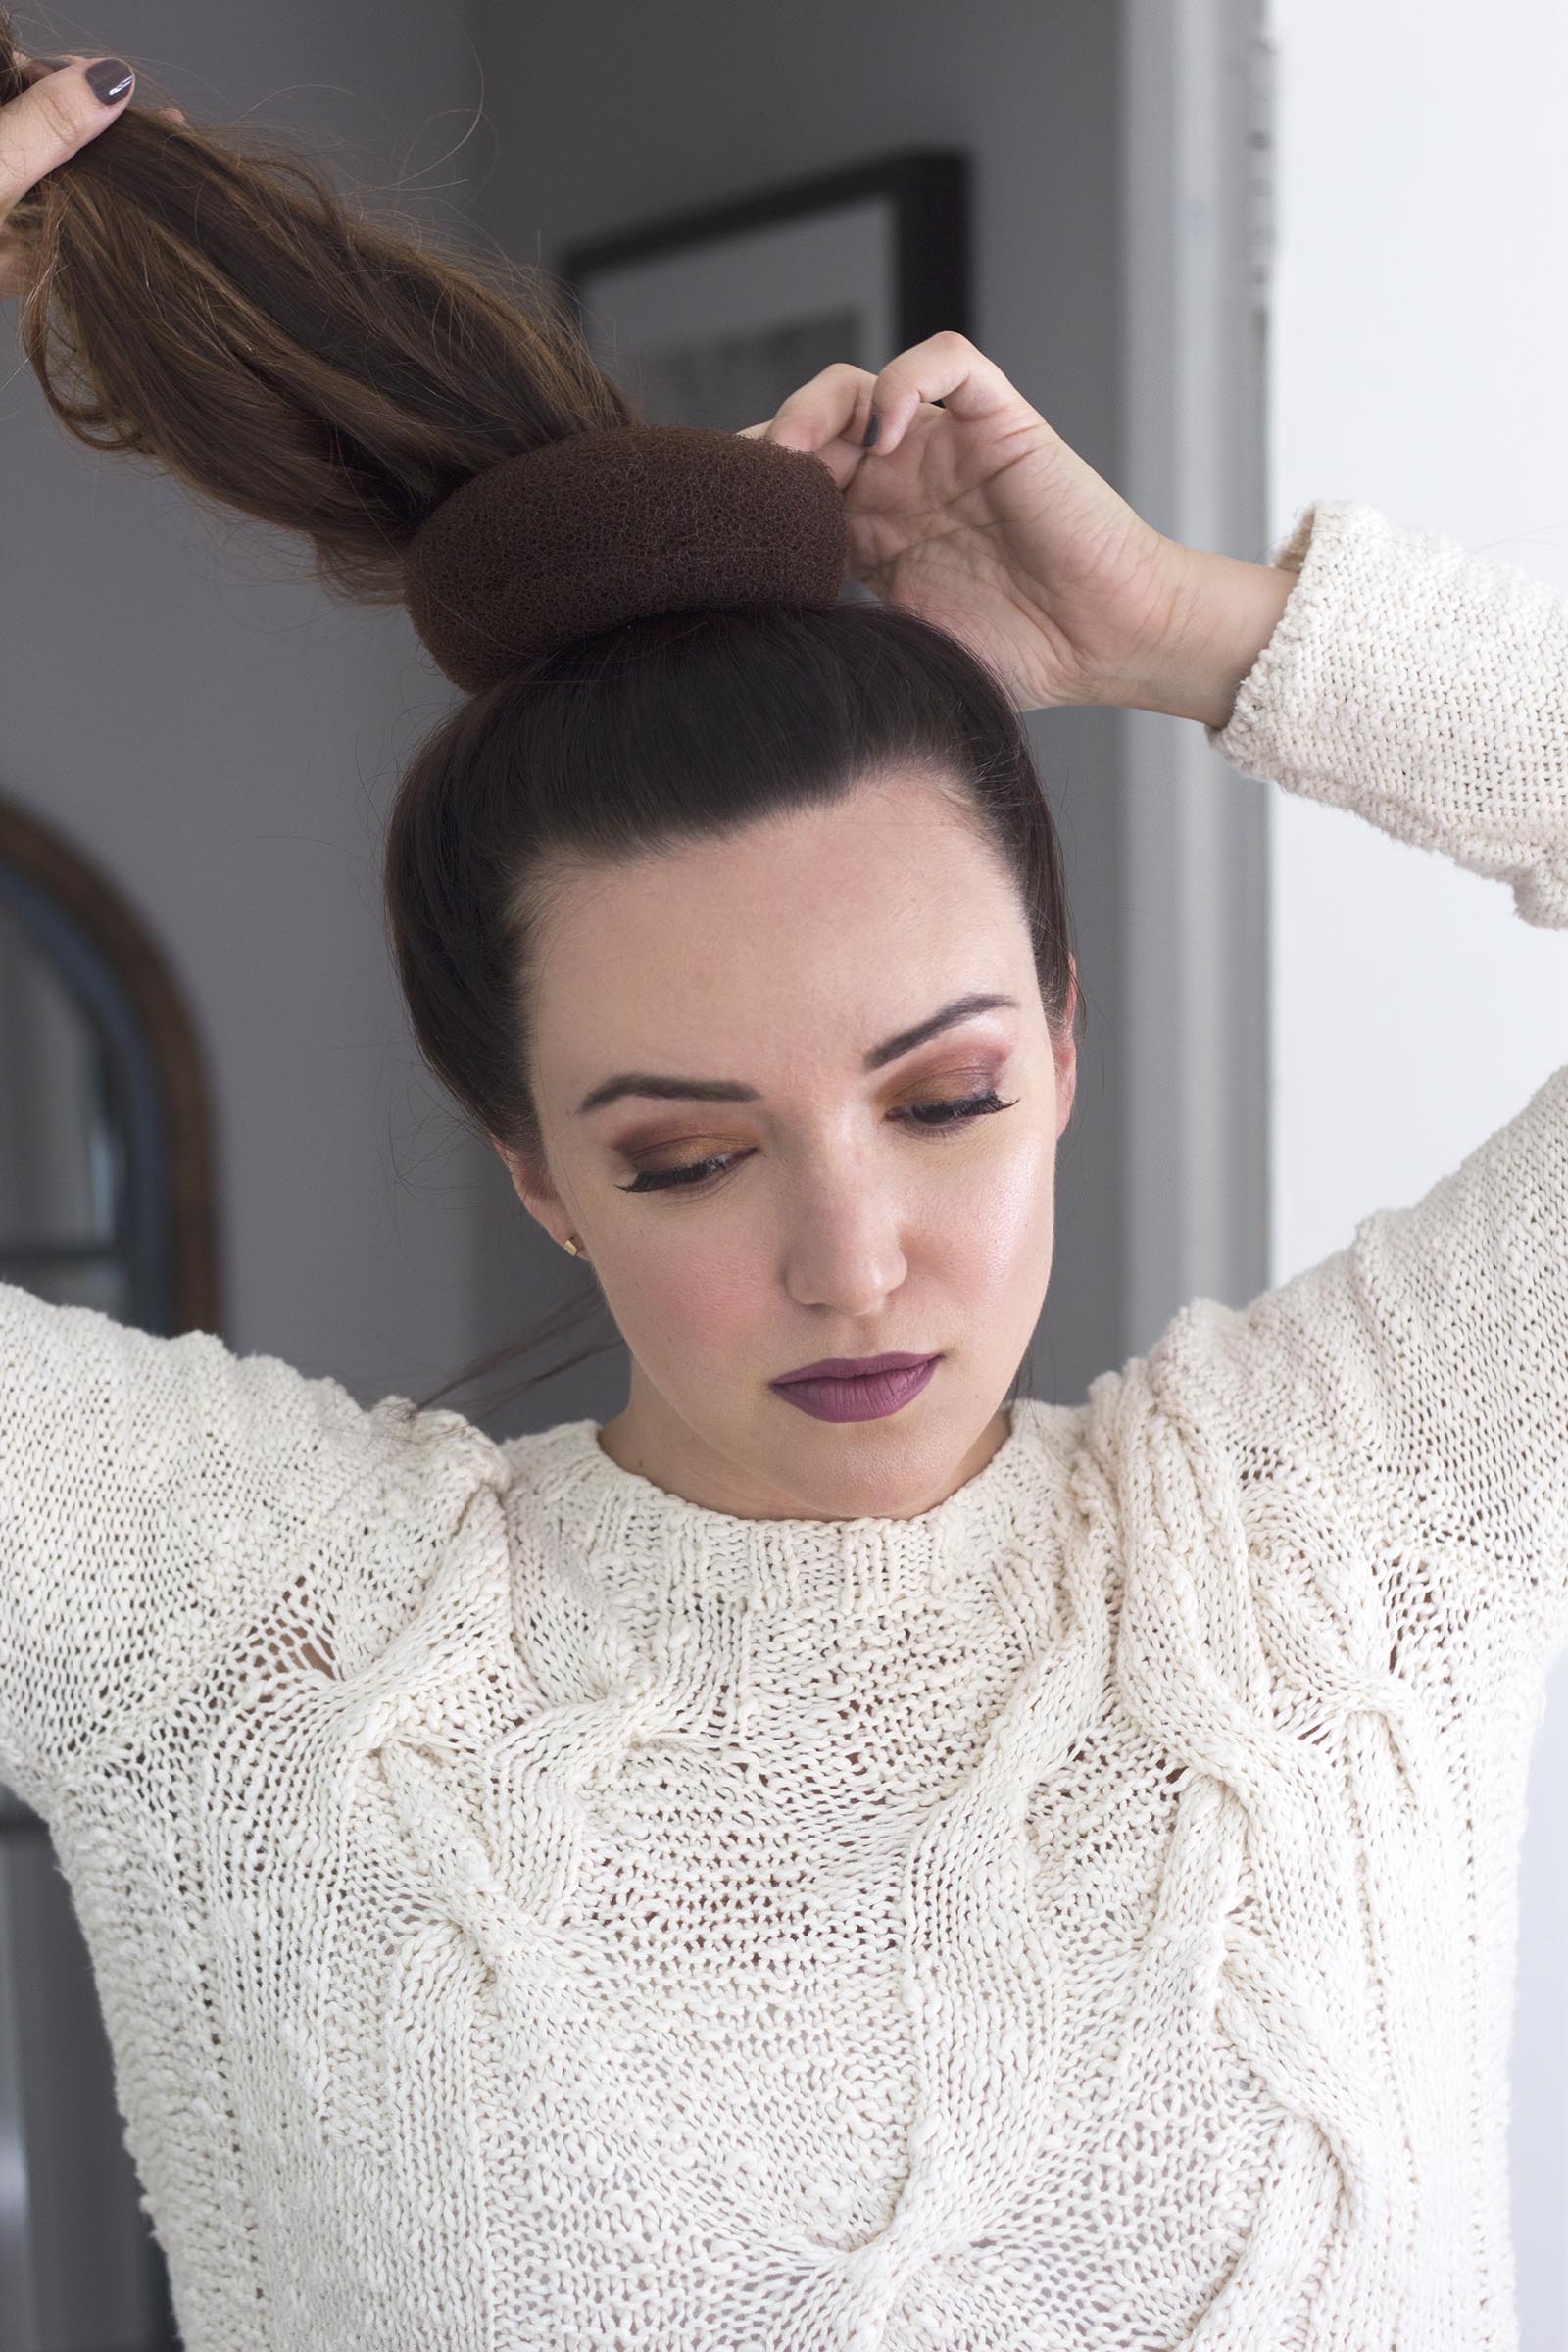 THE PERFECT MESSY BUN | Just Add Glam